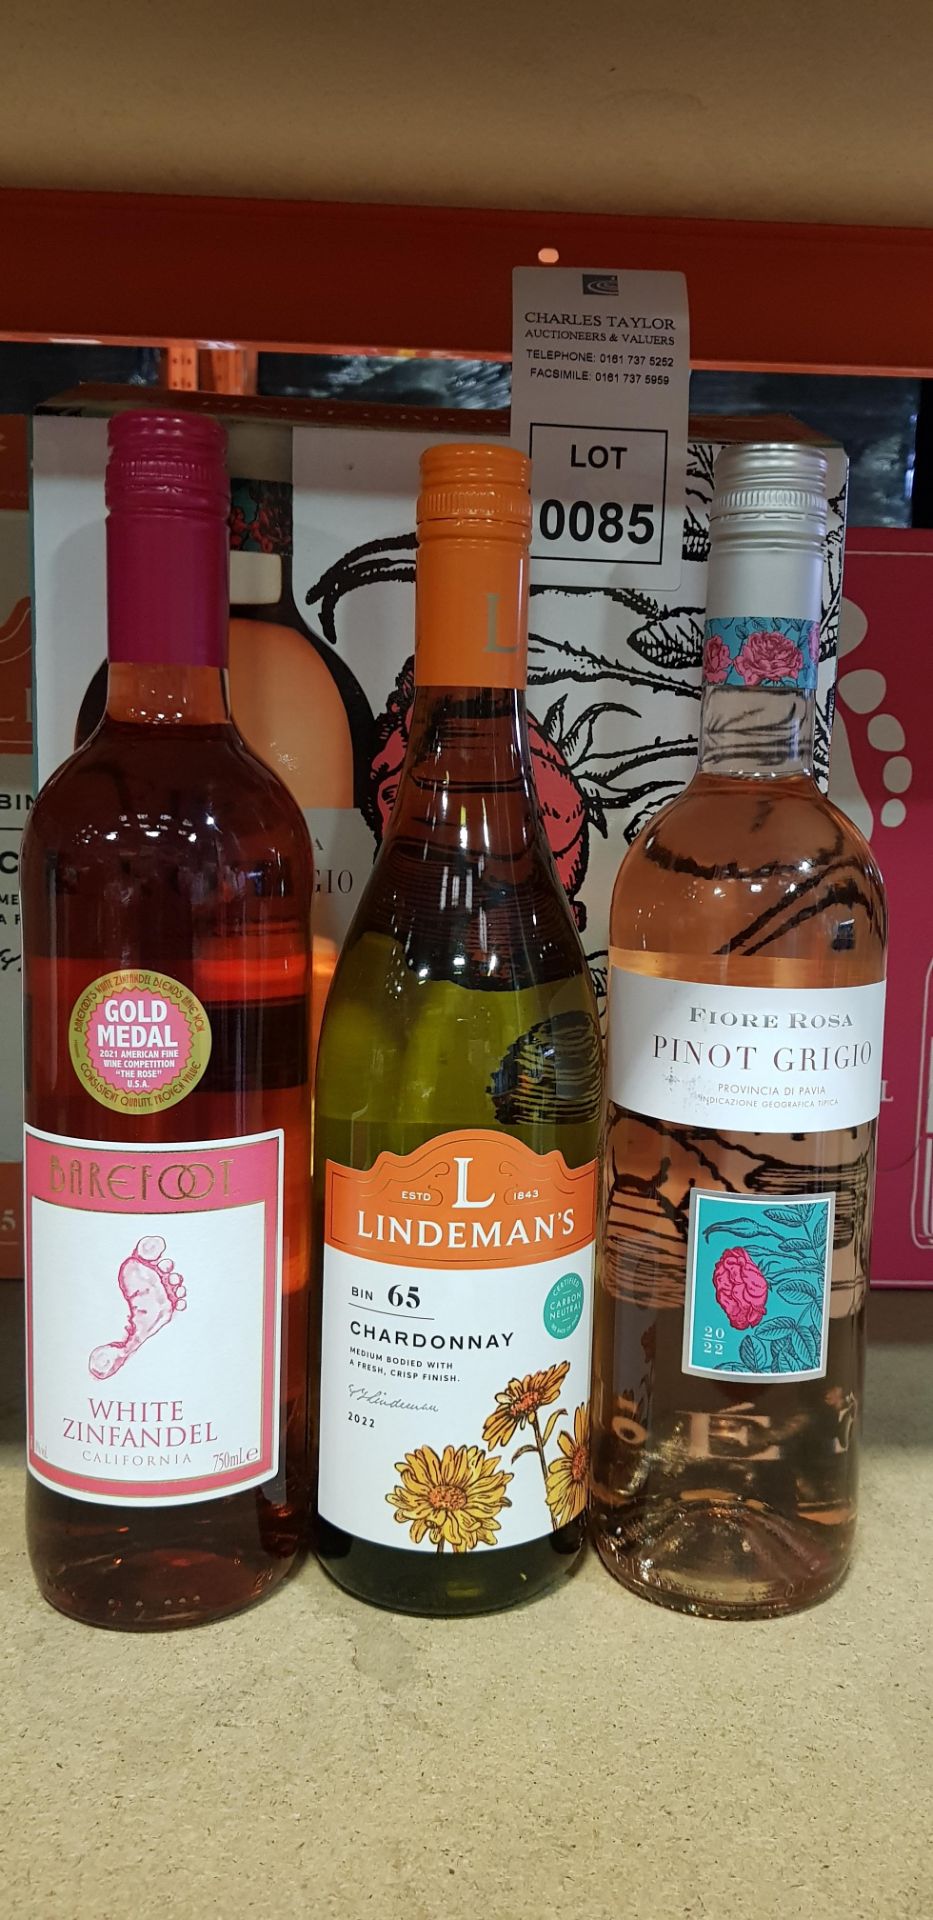 18 X BRAND NEW BOXED MIXED WINE LOT CONTAINING - 6X FIORE ROSA PINOT GRIGIO 750ML - 6X LINDEMANS BIN